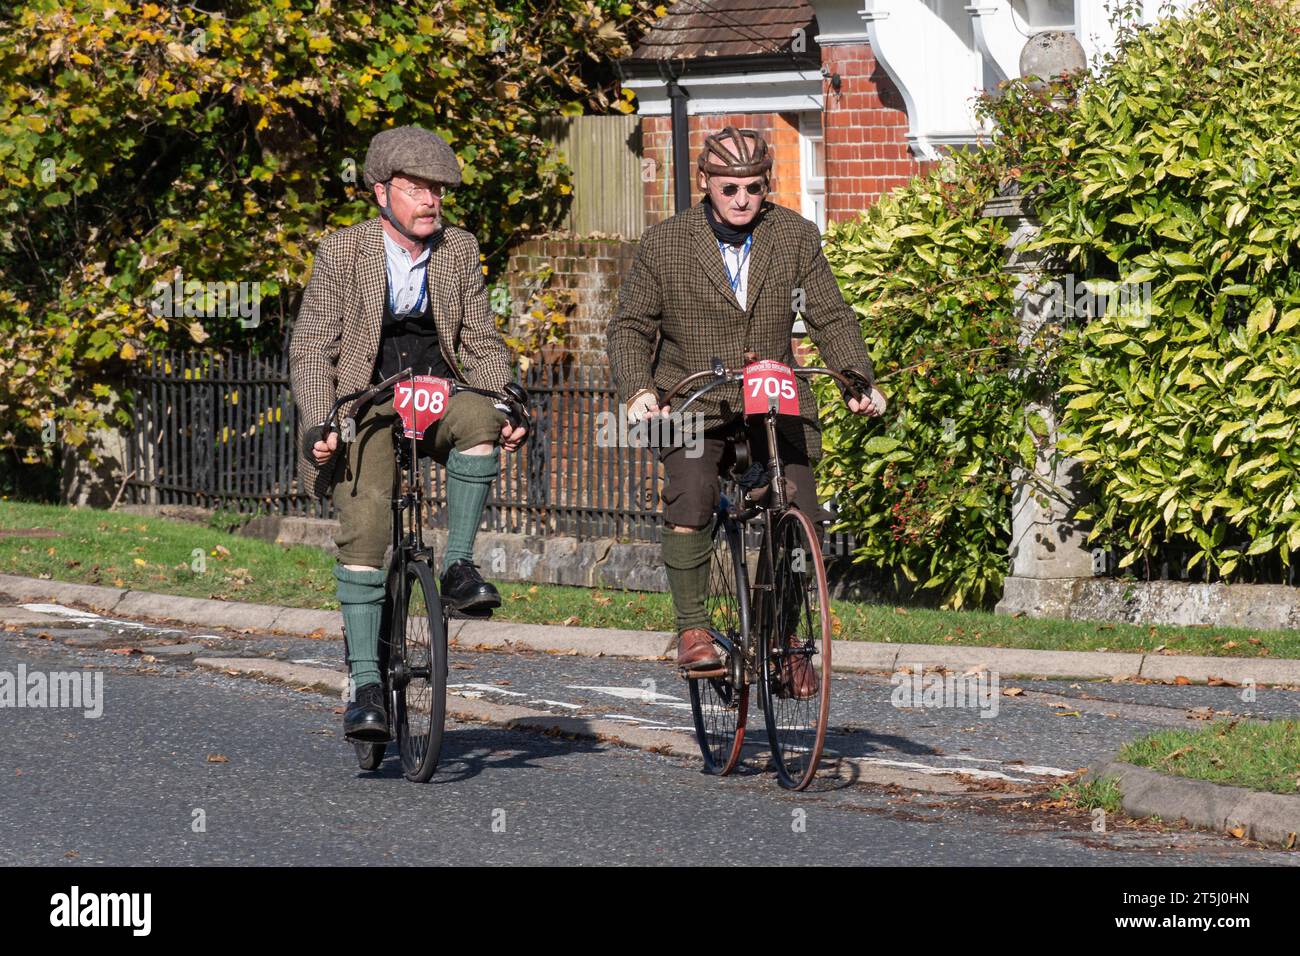 5th November 2023. Participants in the London to Brighton Veteran Car Run 2023 driving through West Sussex, England, UK. The route of the popular annual event runs for 60 miles. Pictured: Two men riding old bicycles wearing retro tweed clothes, one with a leather bicycle helmet. On the left (number 708) an 1895 Crypto cycle standard model body and on the right (no 705) an 1891 New Mail safety bicycle. Stock Photo